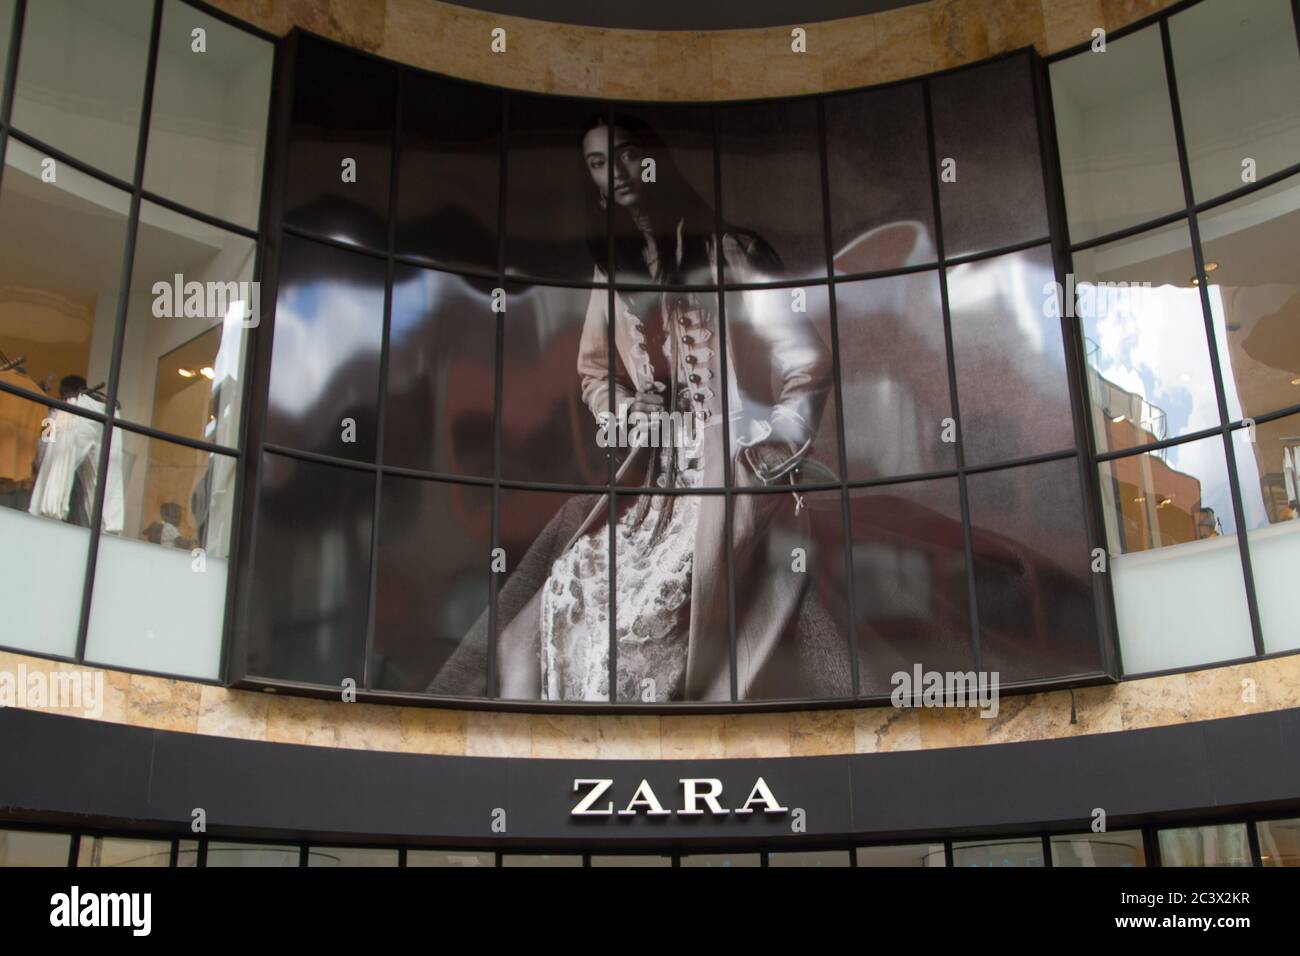 ZARA logo for Spanish clothing stores. Zara is the main fashion clothing  brand for children and adults of the Spanish company Inditex, which also  owns Stock Photo - Alamy